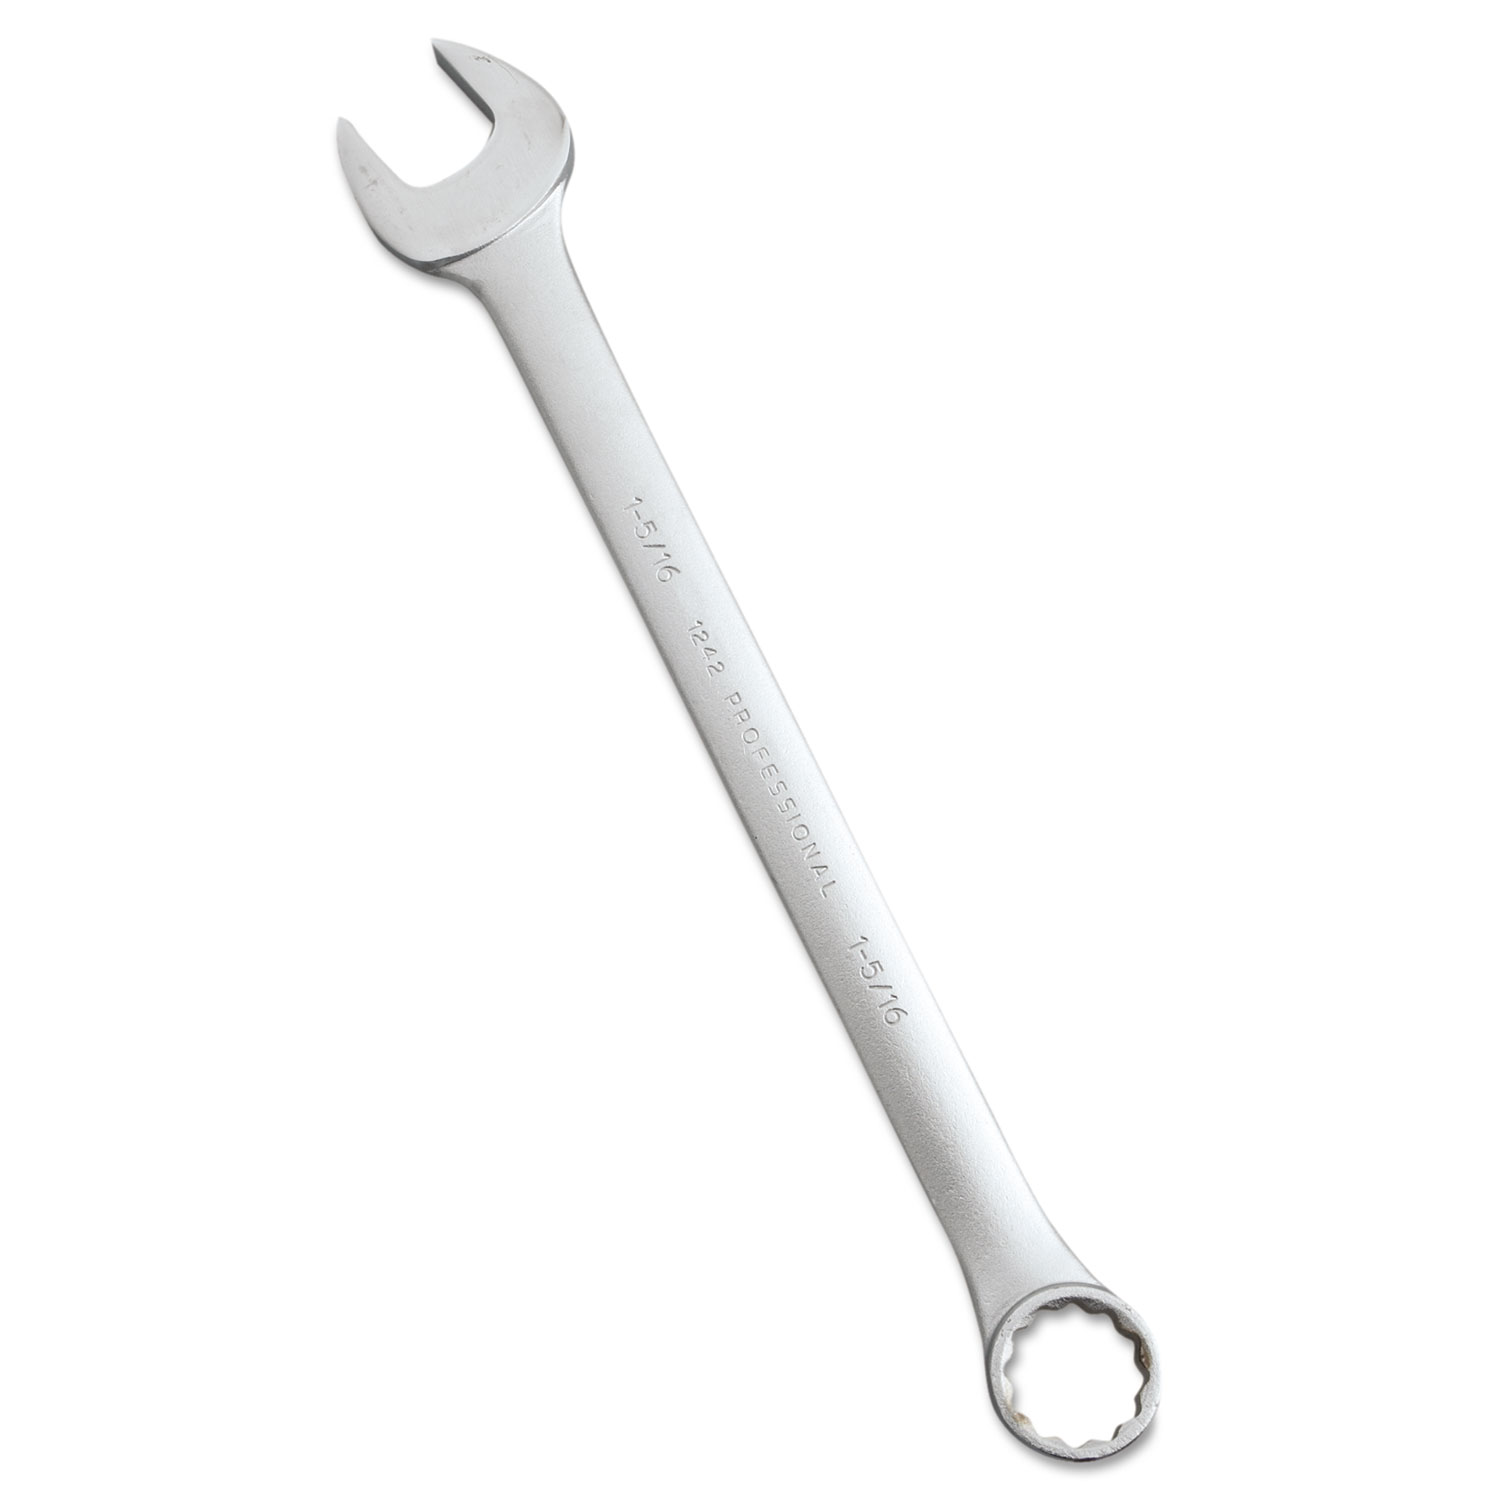 PROTO Combination Wrench, 16 7/8 Long, 1 1/4 Opening, 12-Point Box